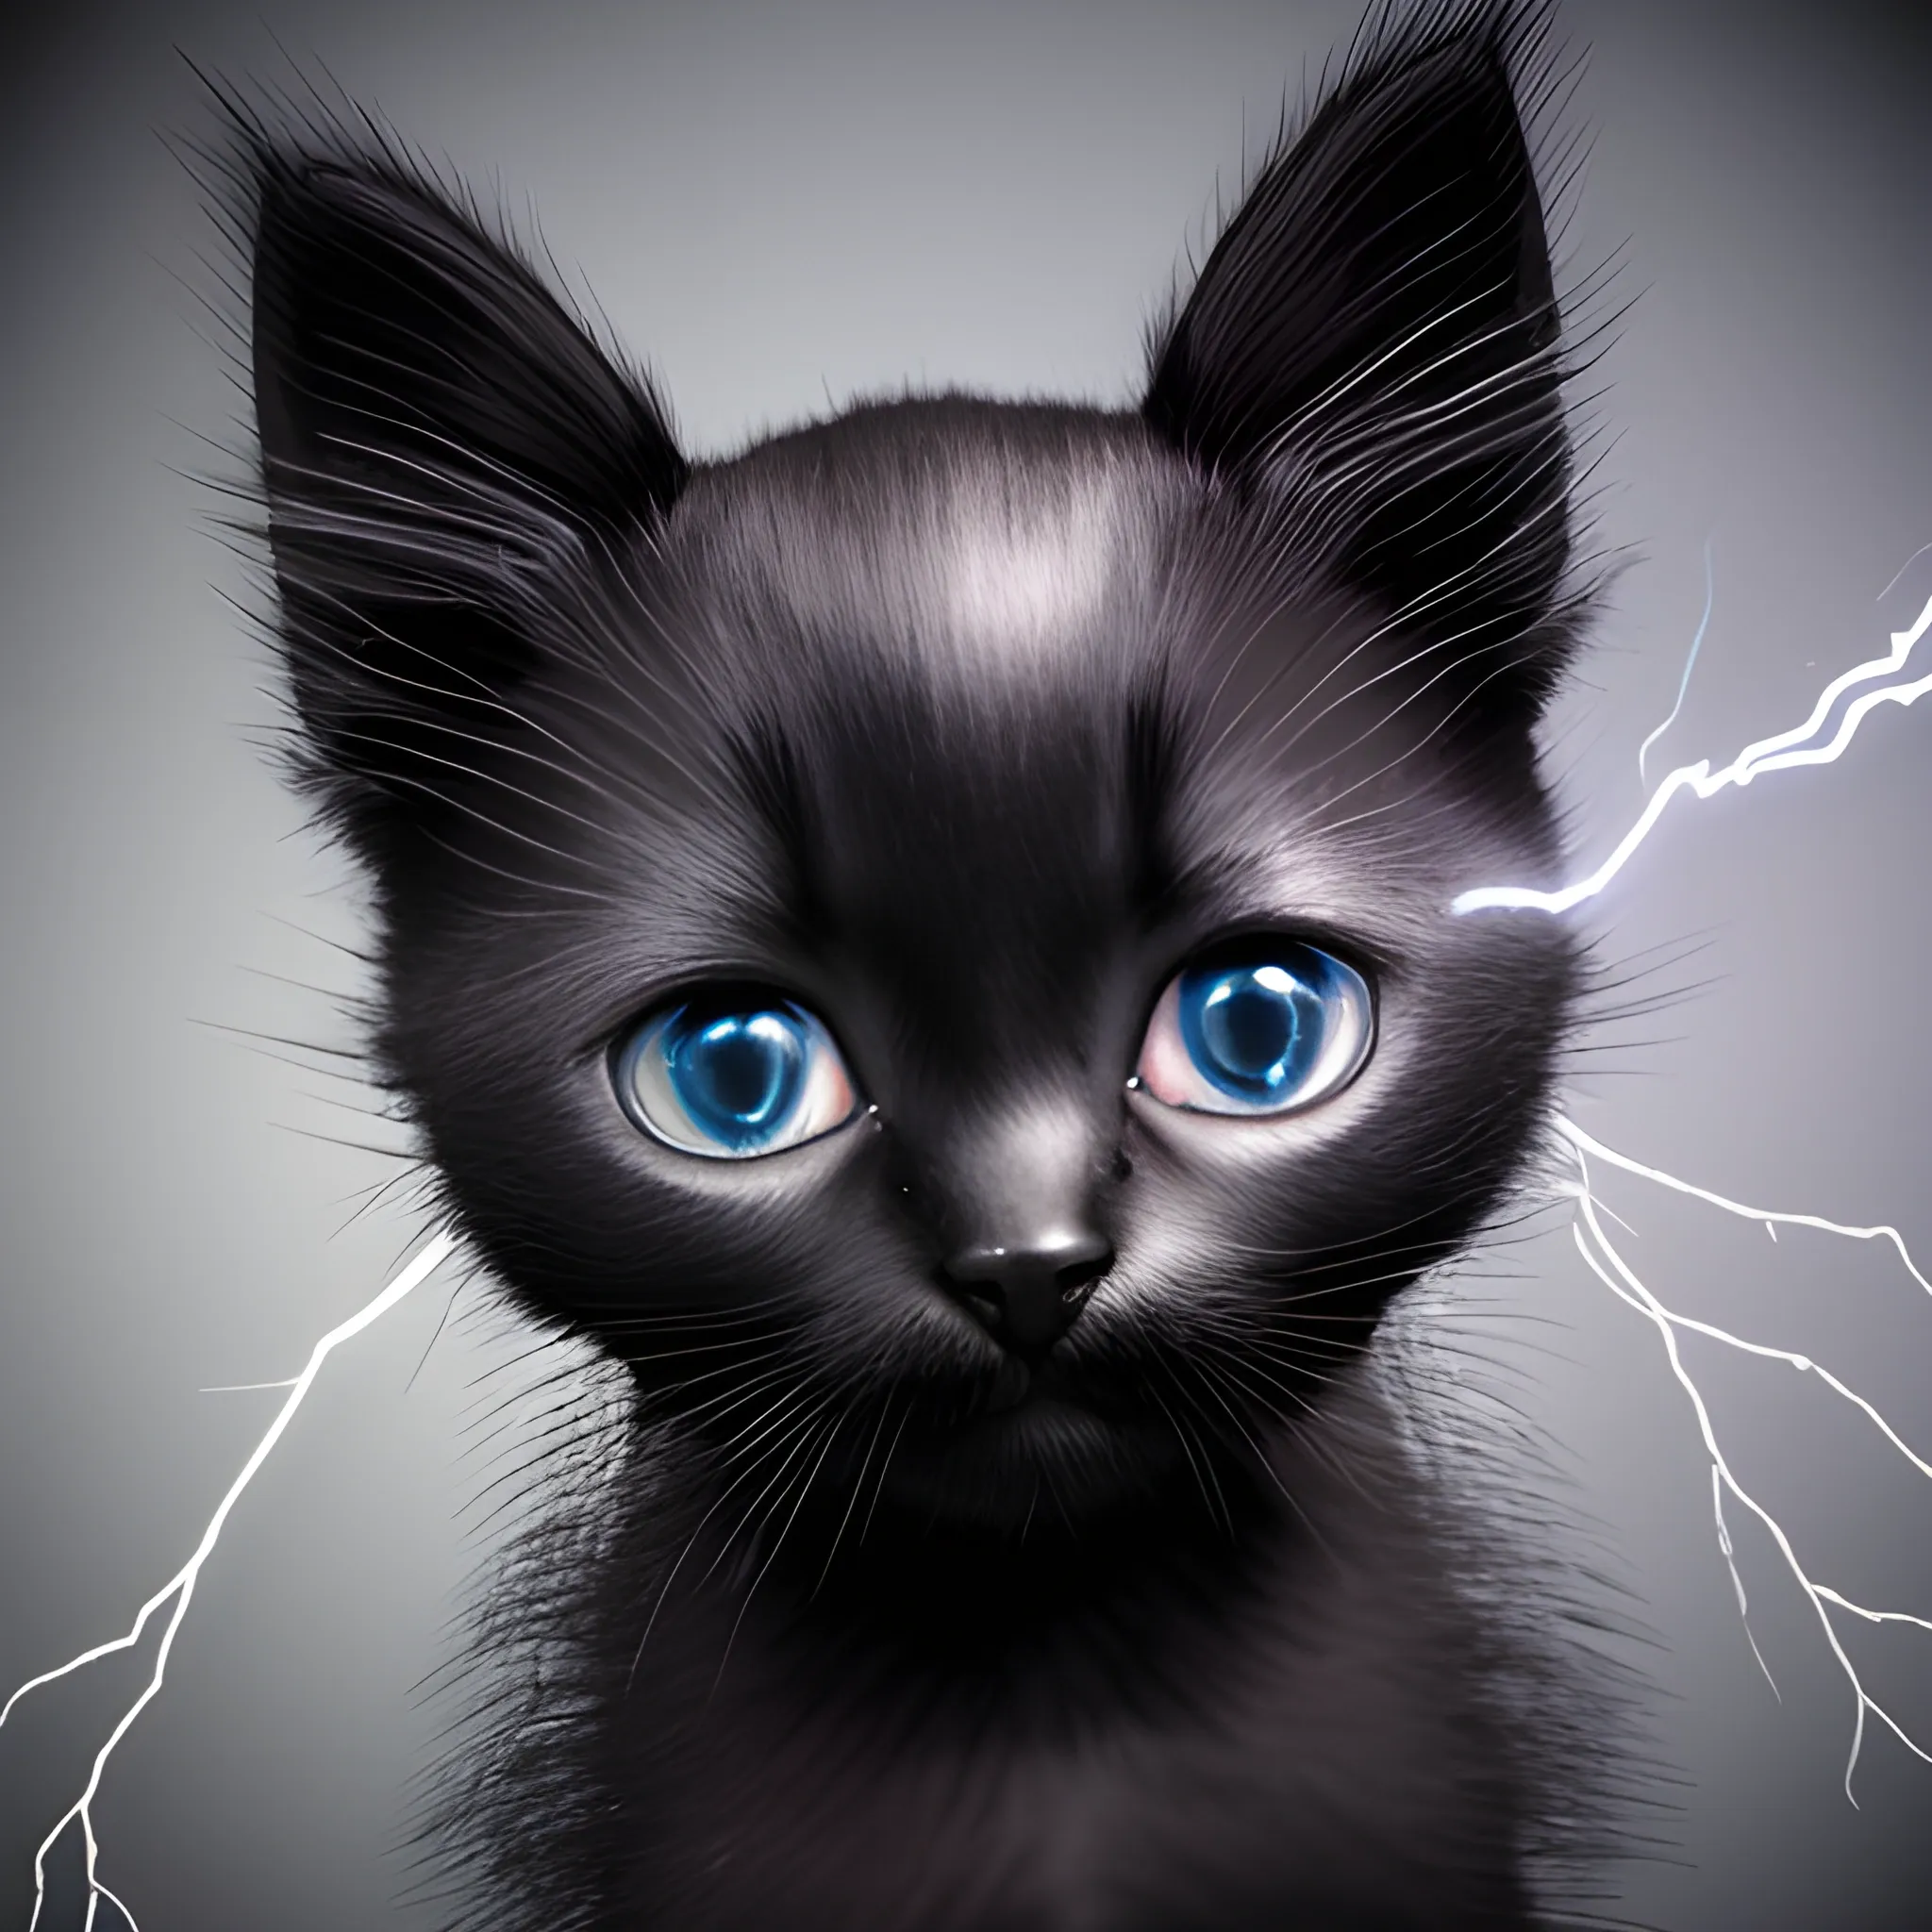 Black kitten with, silver strikes, of lightening blot on forehead, and rest of body, 3D